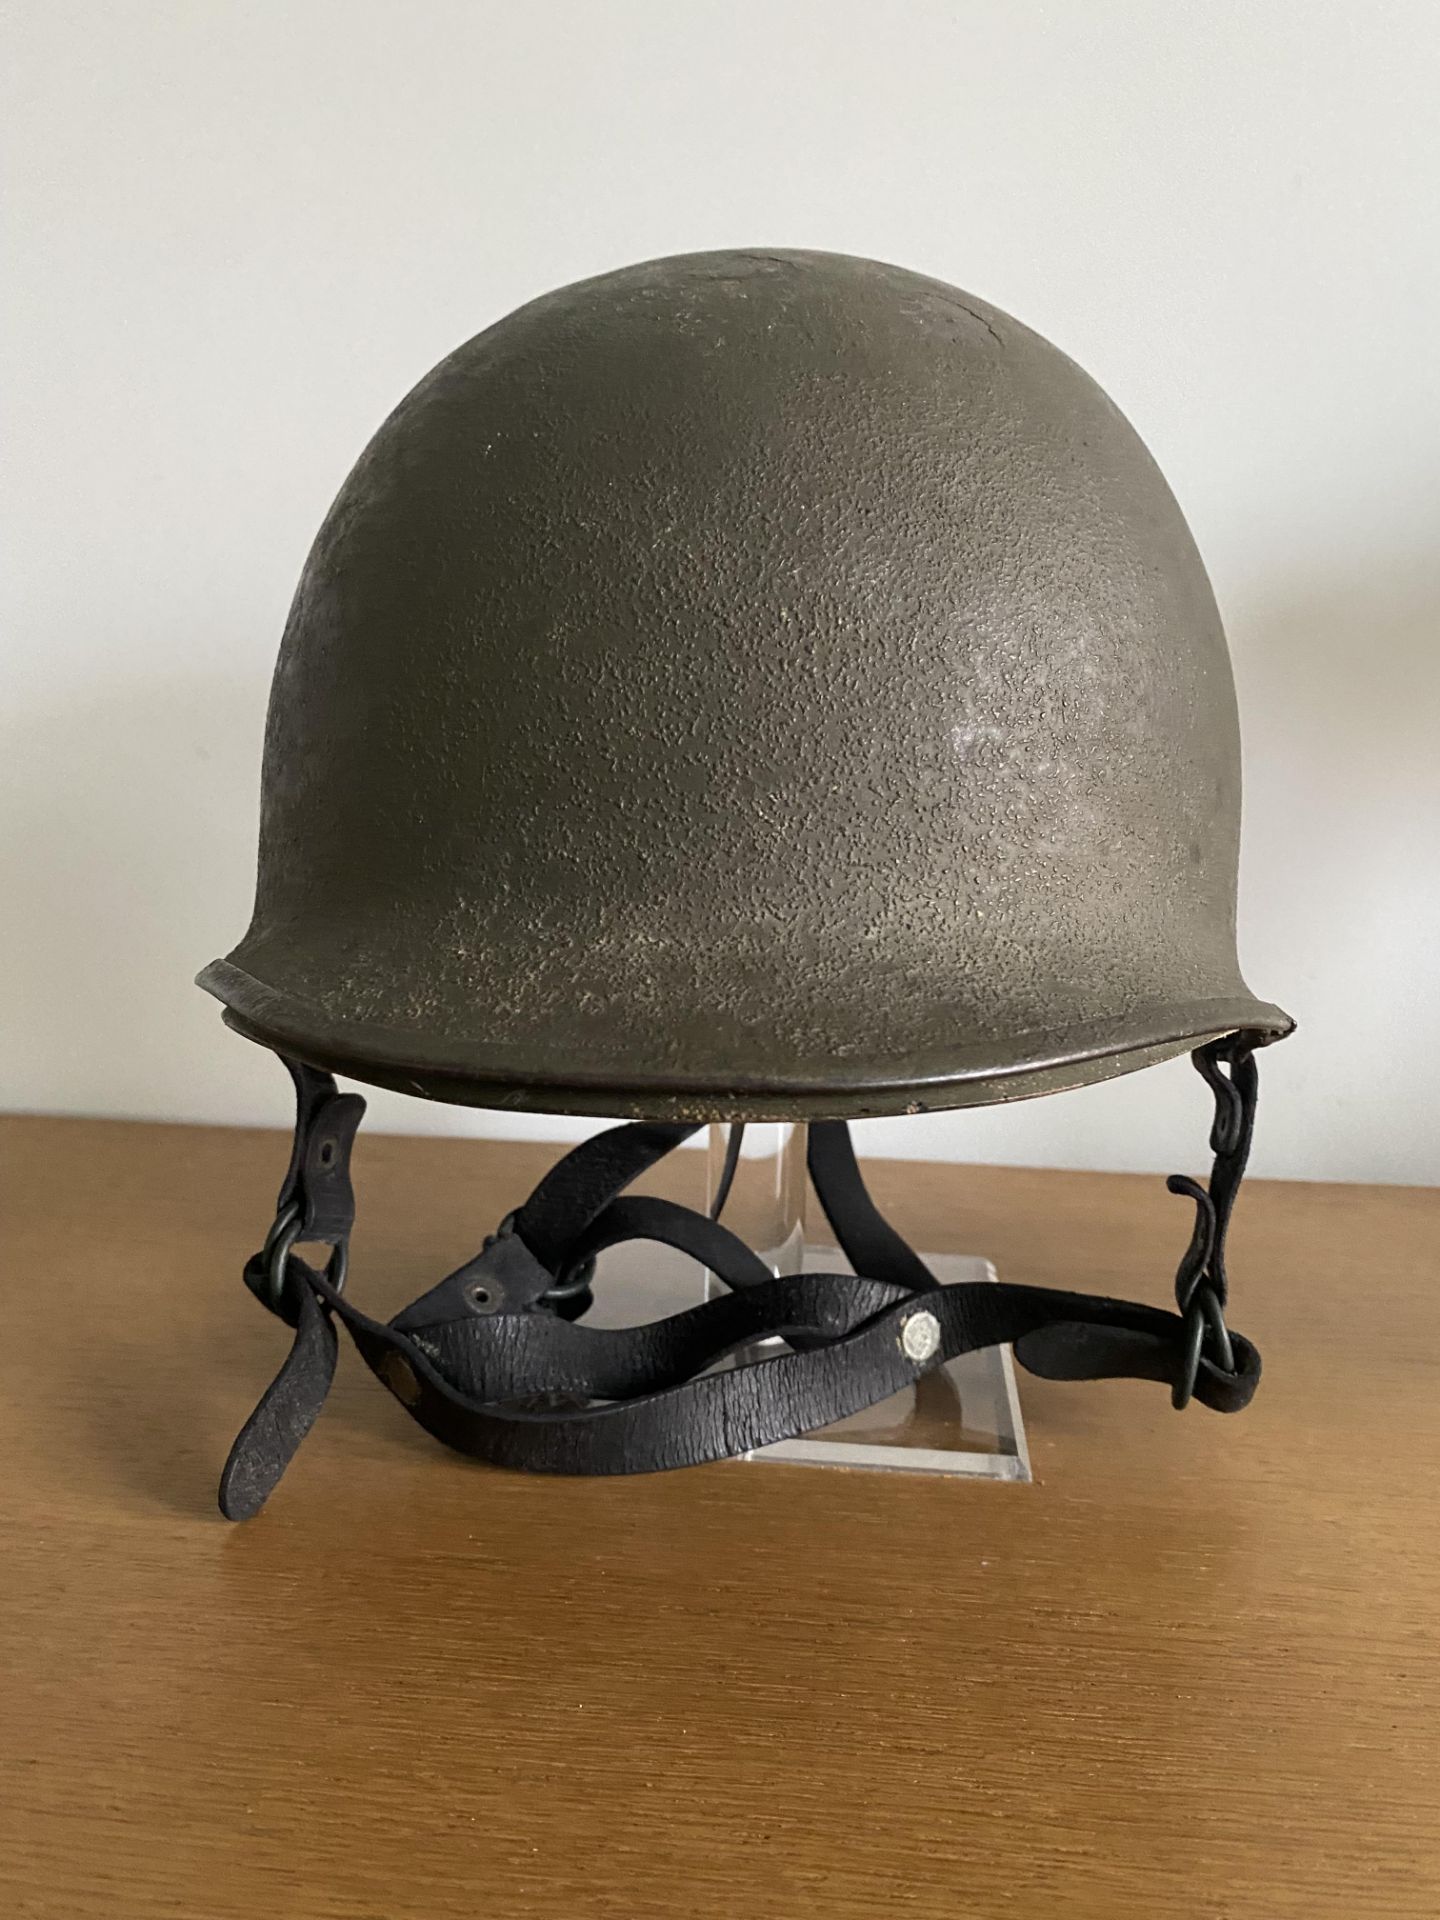 US Helmet French Indochina War - Image 5 of 5